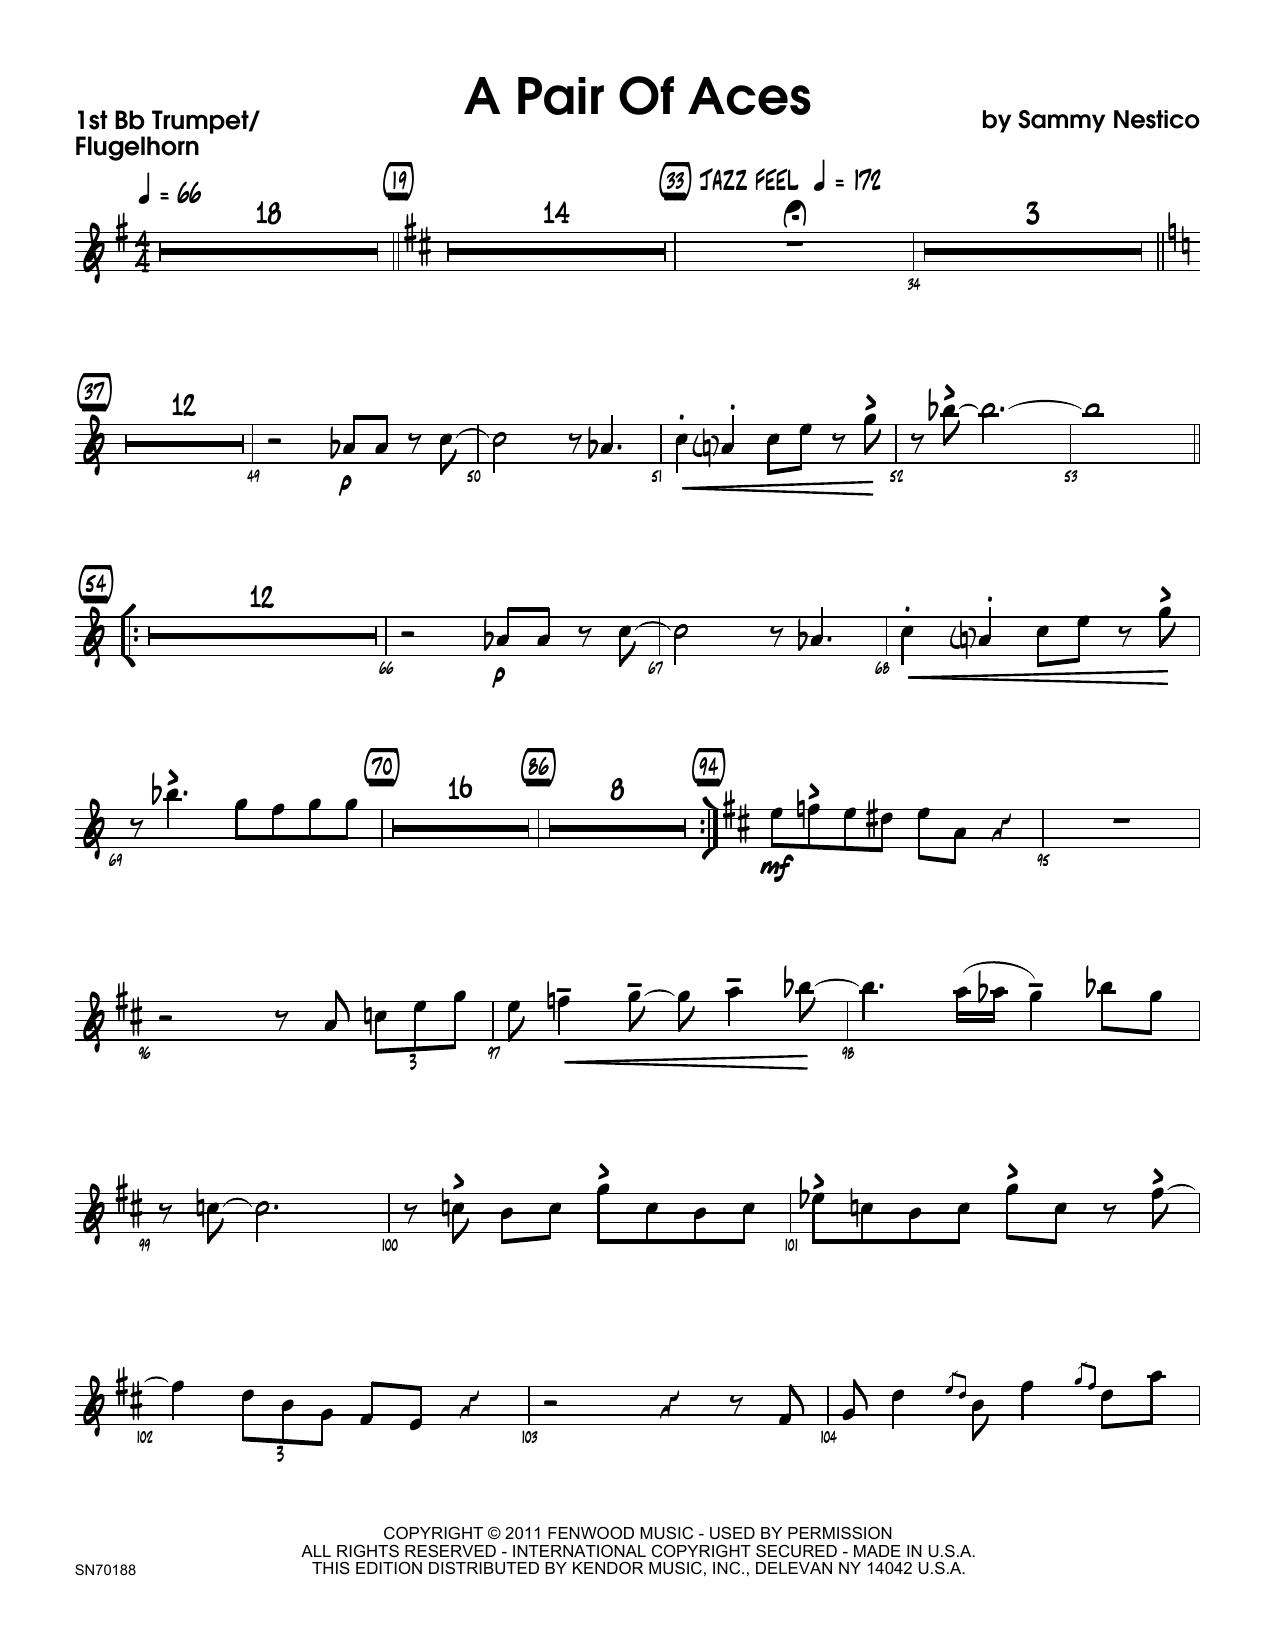 Download Sammy Nestico A Pair Of Aces - 1st Bb Trumpet Sheet Music